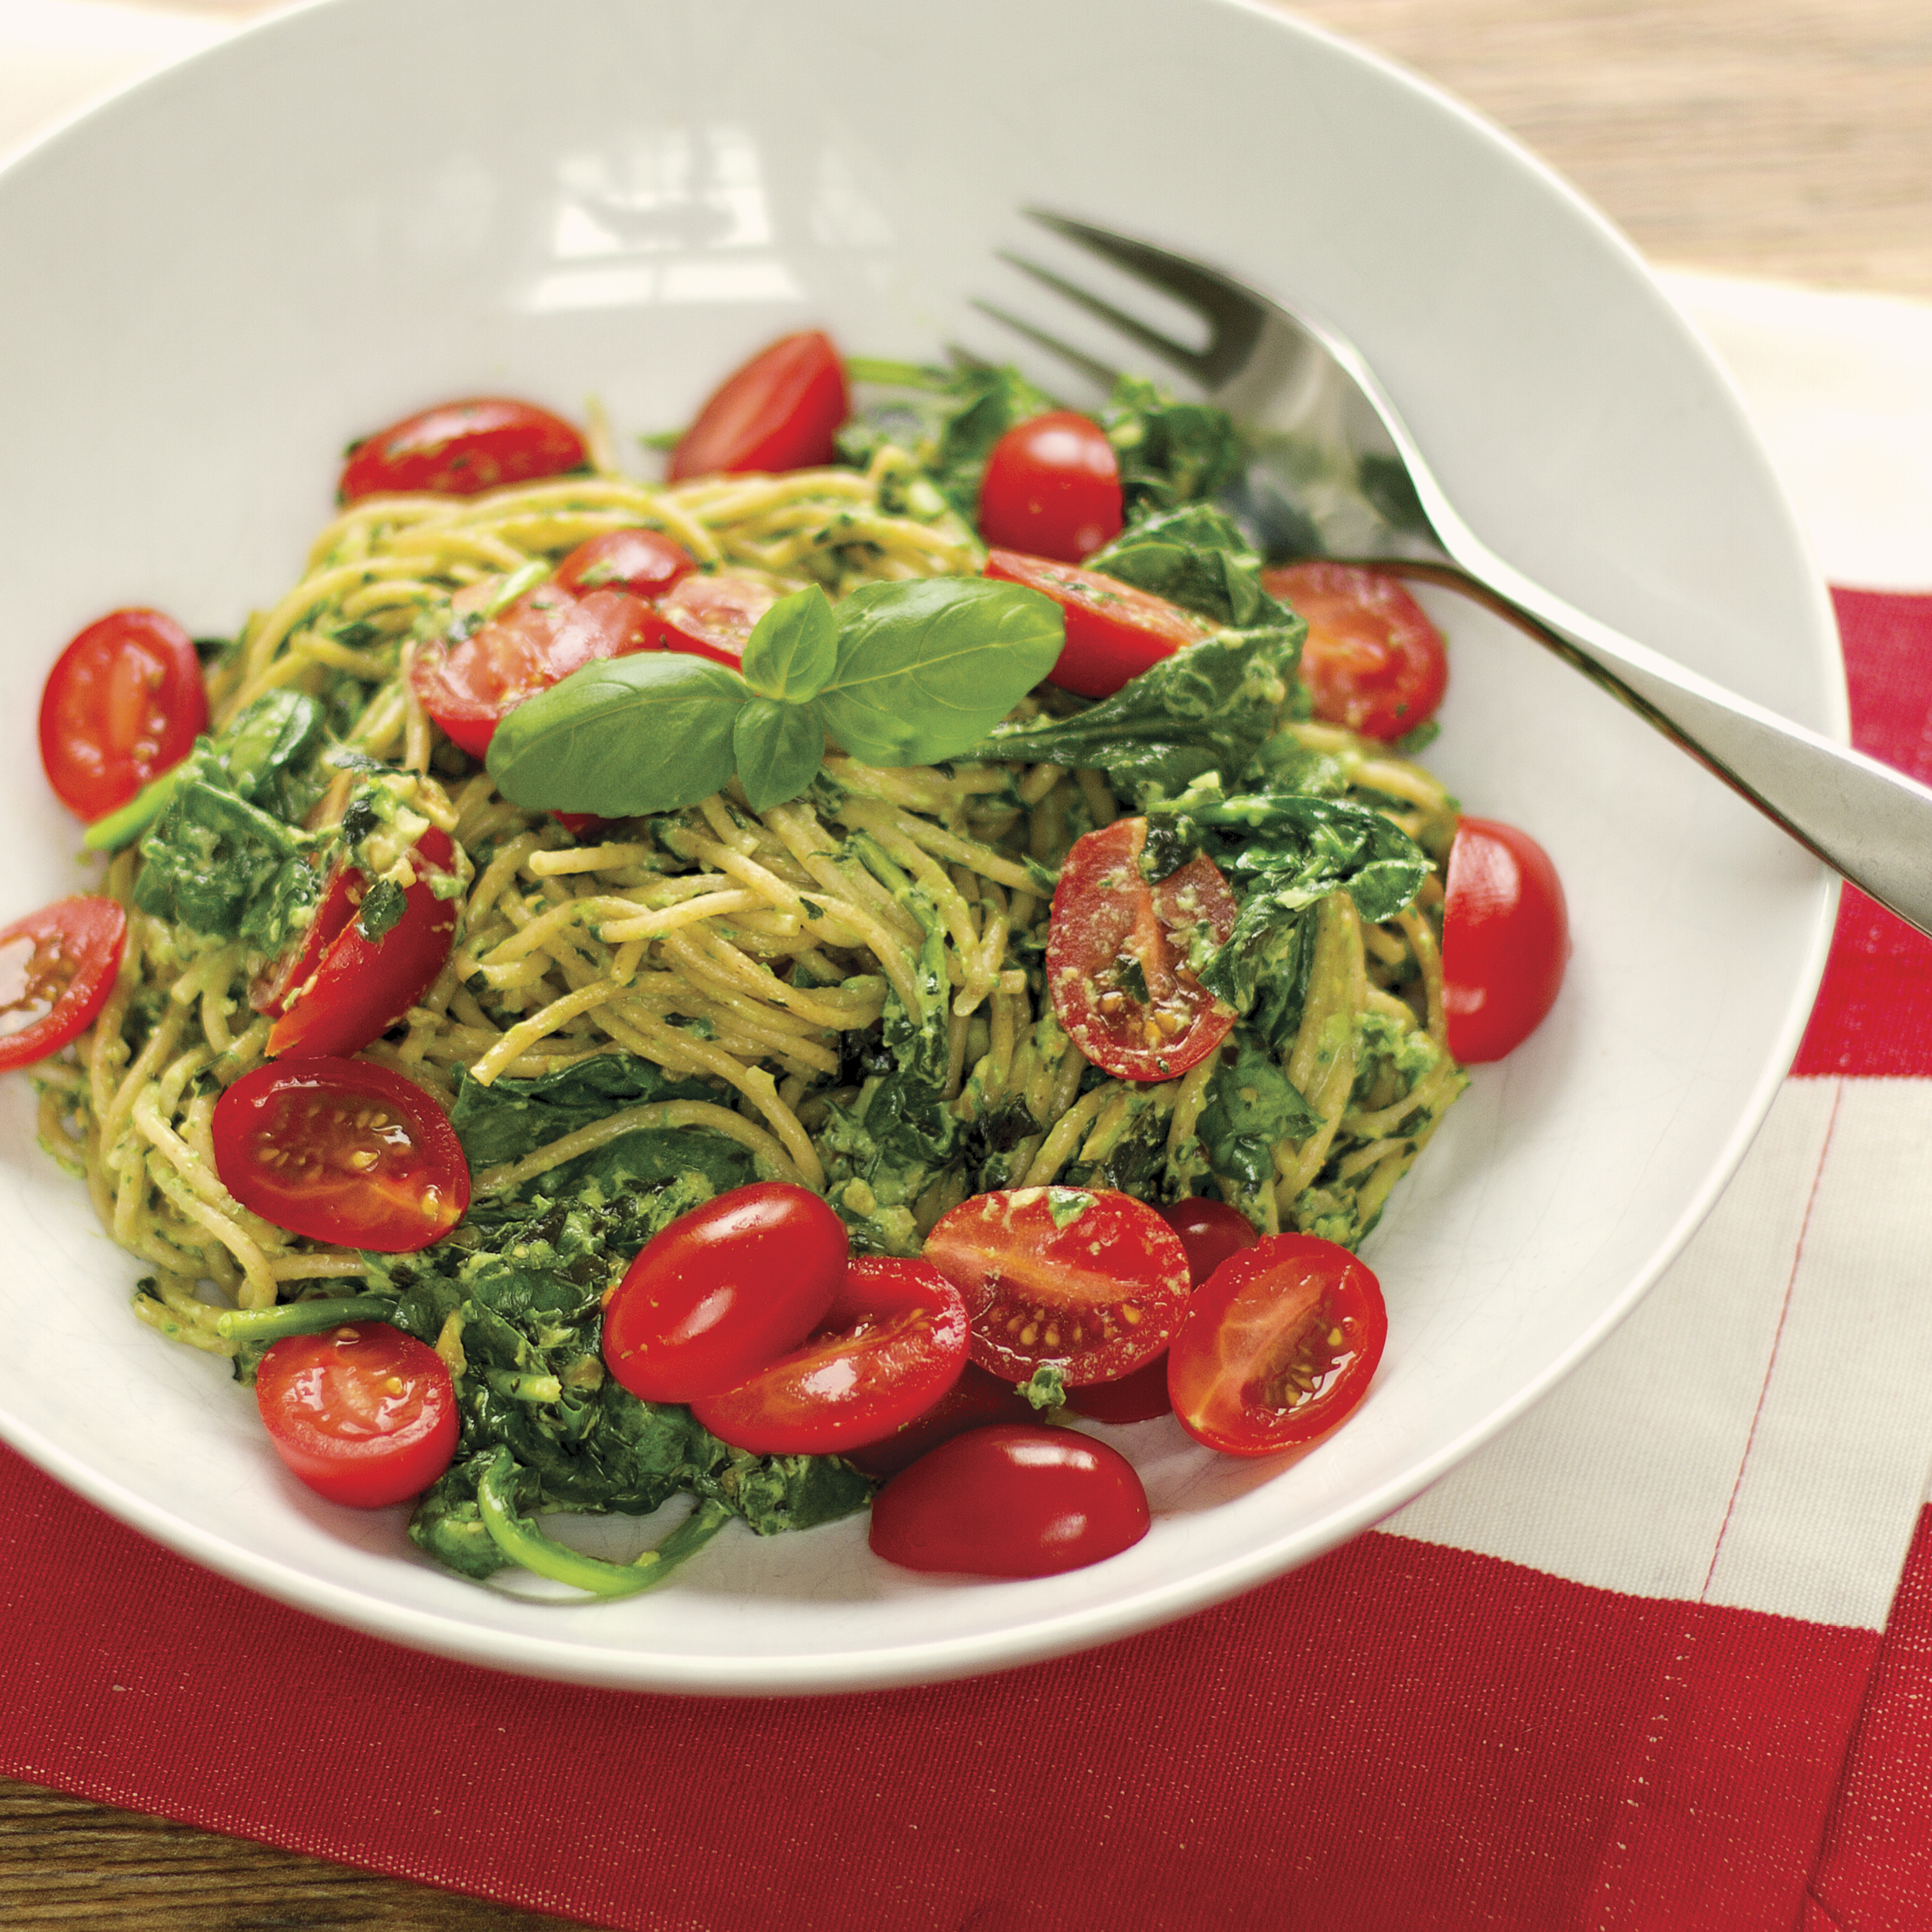 Pasta with Pesto, Spinach and Cherry Tomatoes